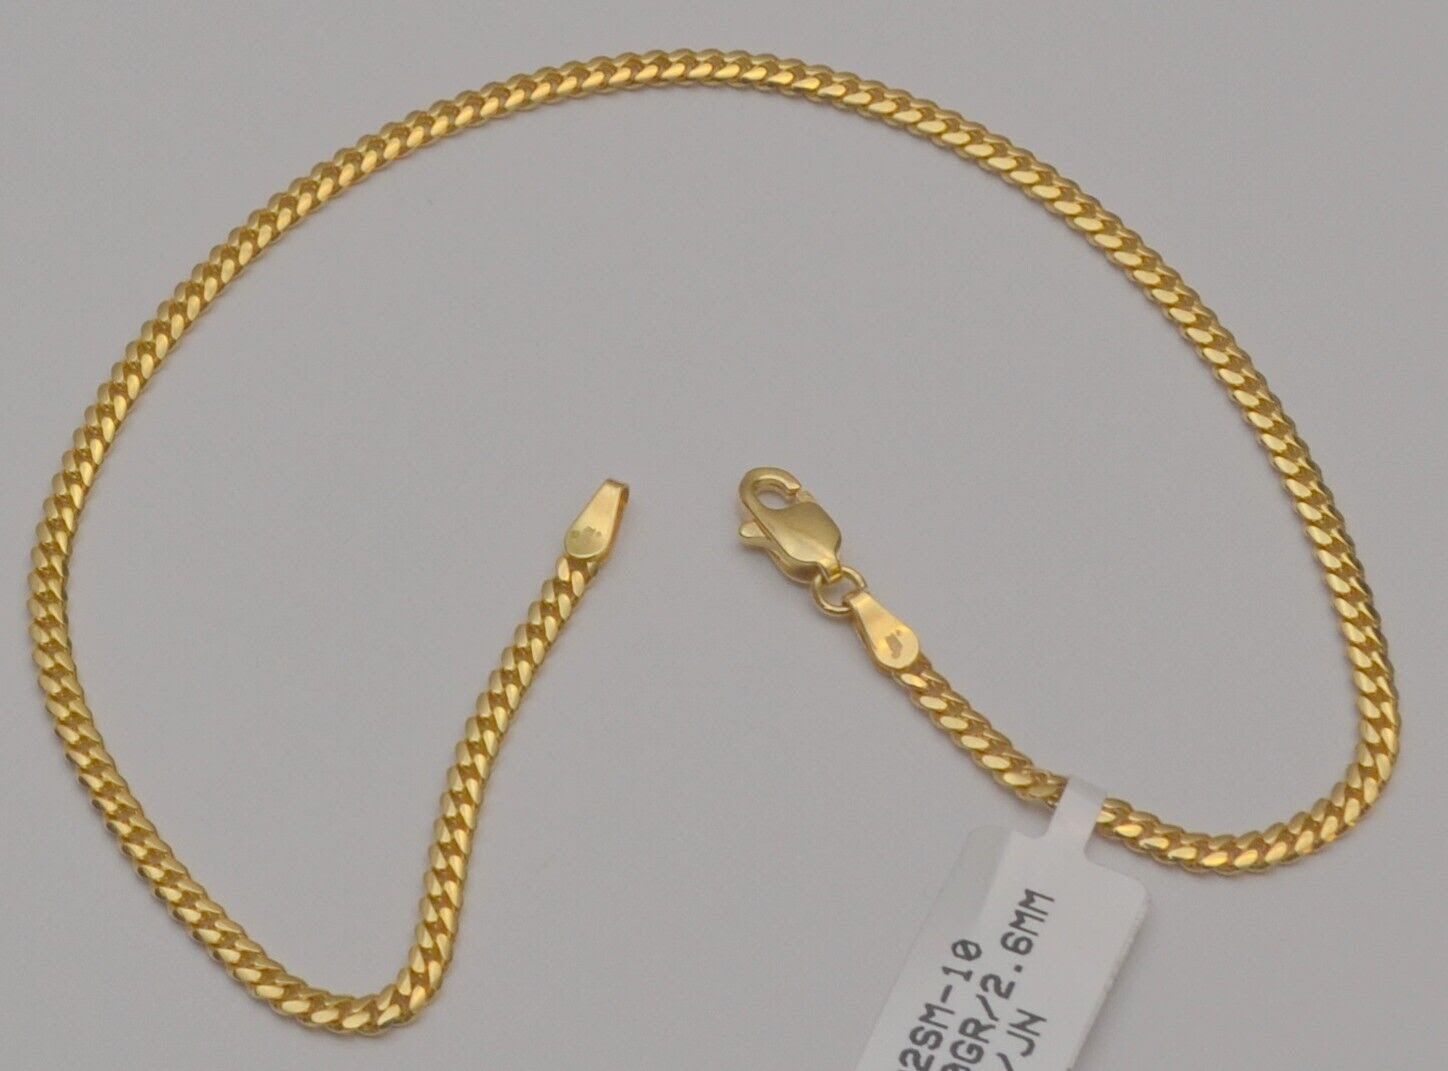 Gold chain 10k solid yellow cuban link anklet bracelet 10 in 2.6 mm 5.0